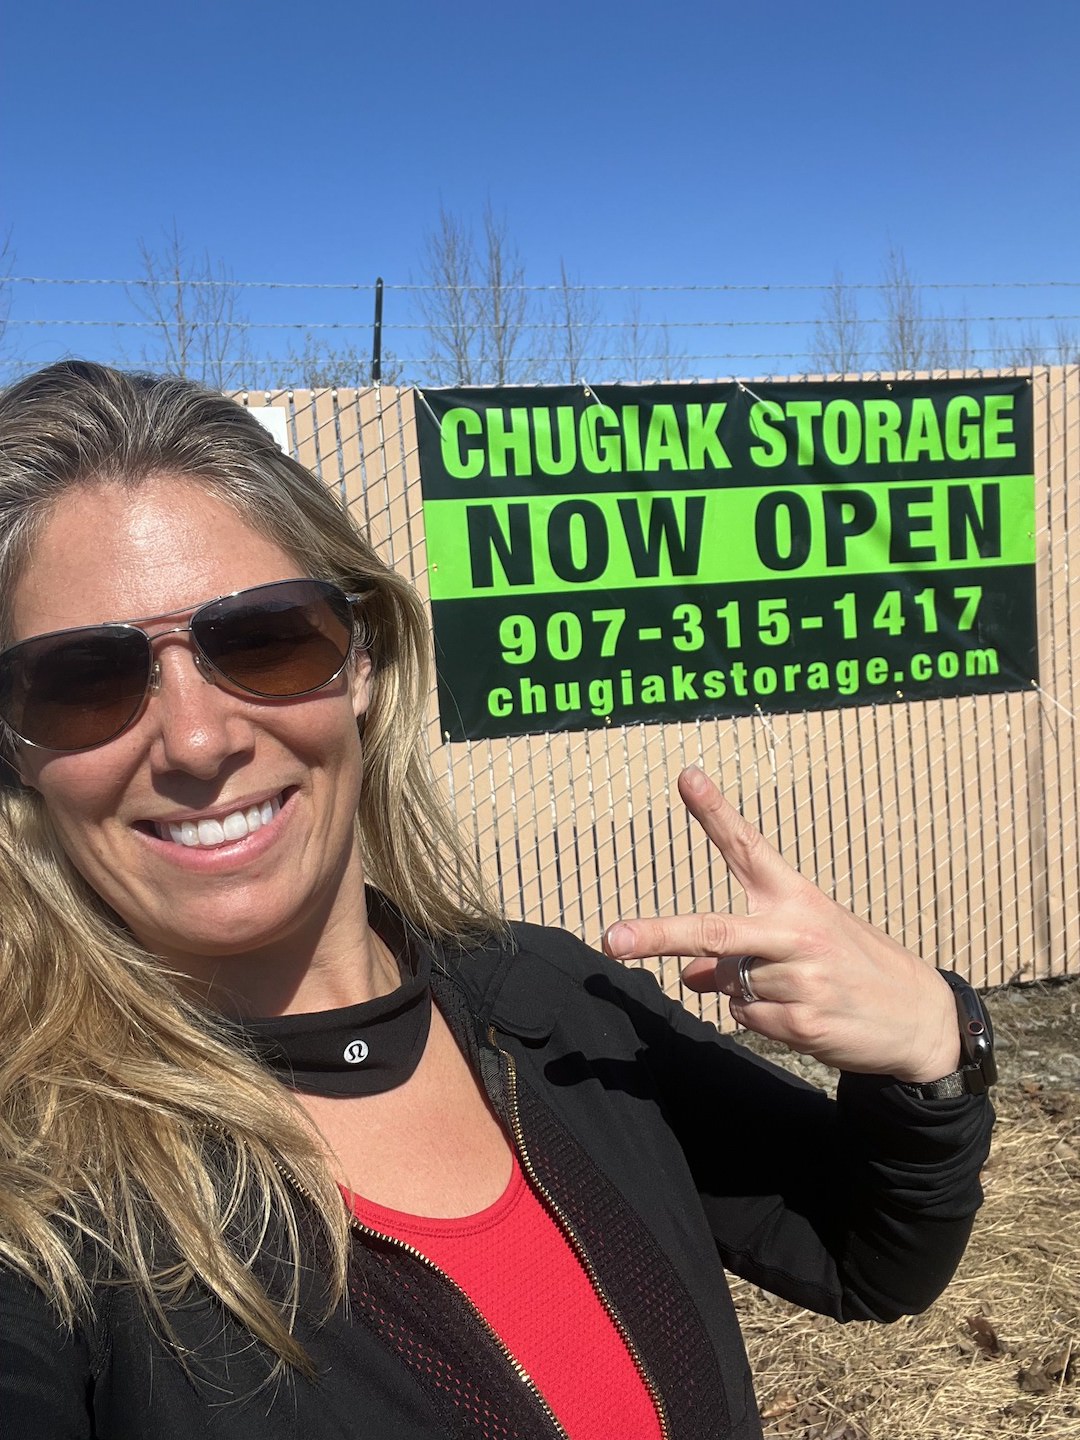 Anchorage Storage Rental Company Has 10x40 Feet Parking Space For Vehicles